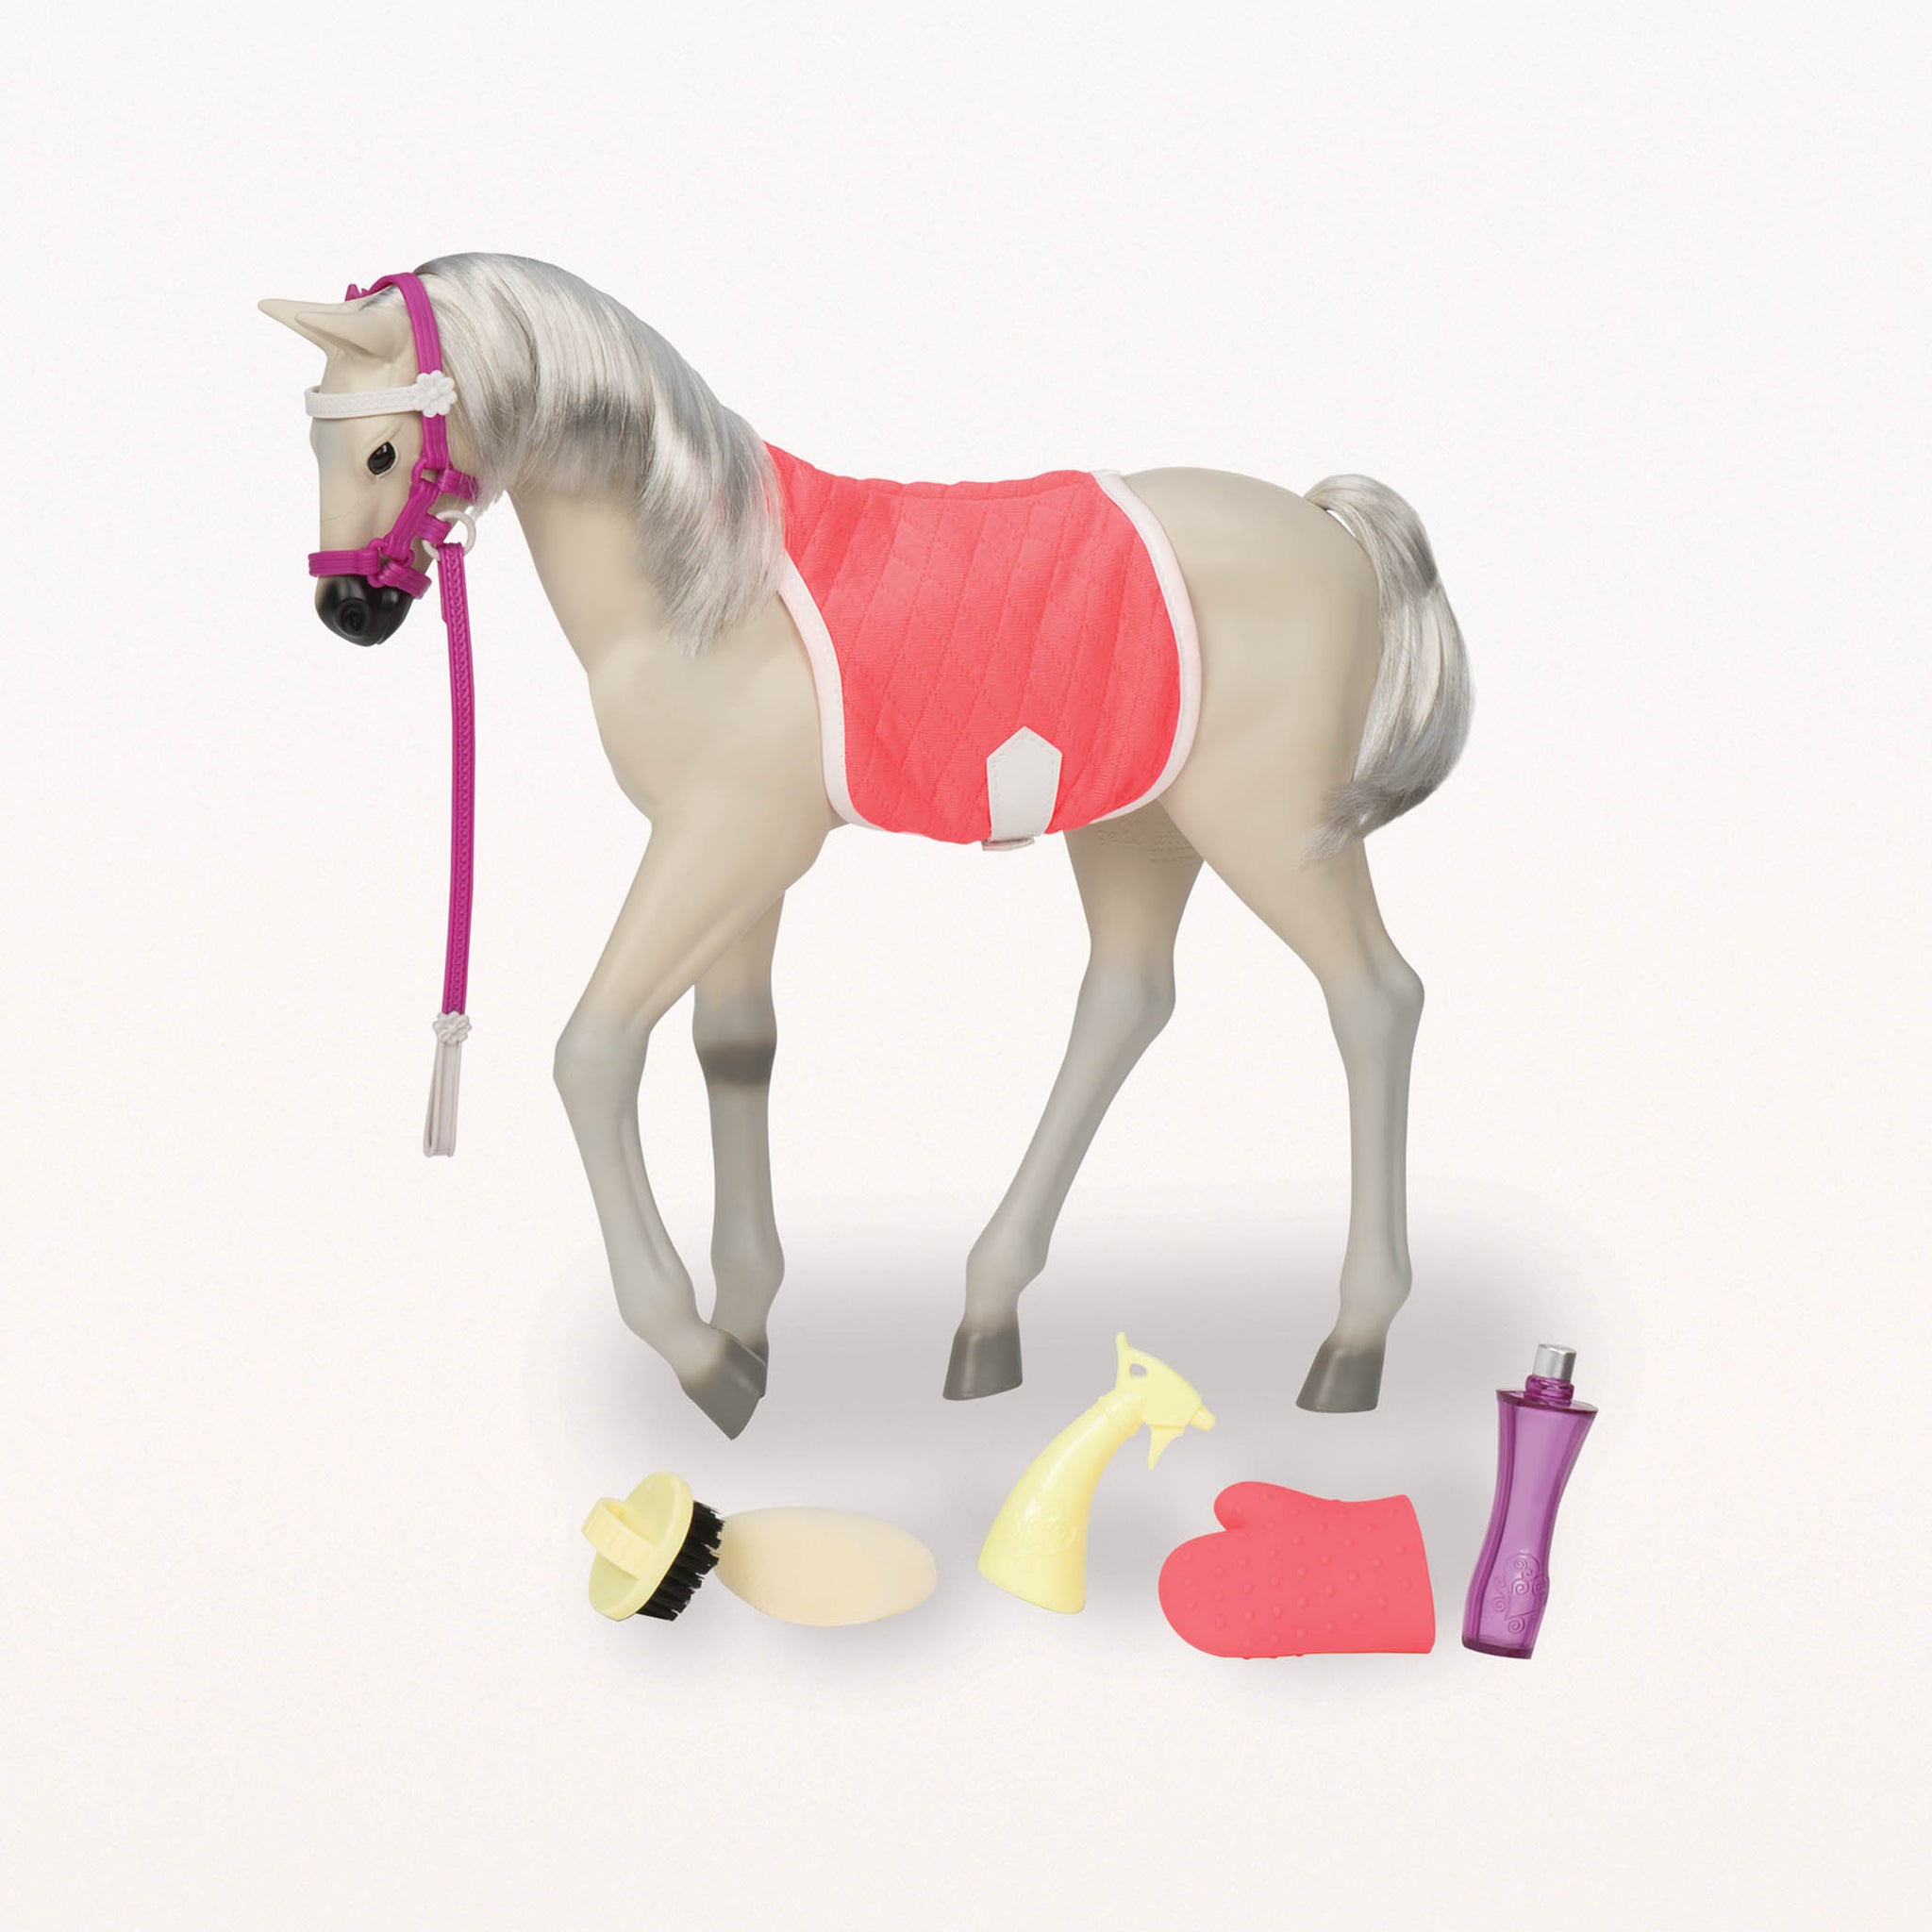 Our Generation Horse Foal - Mustang is an amazing doll accessory for creative play for young girls The Toy Wagon